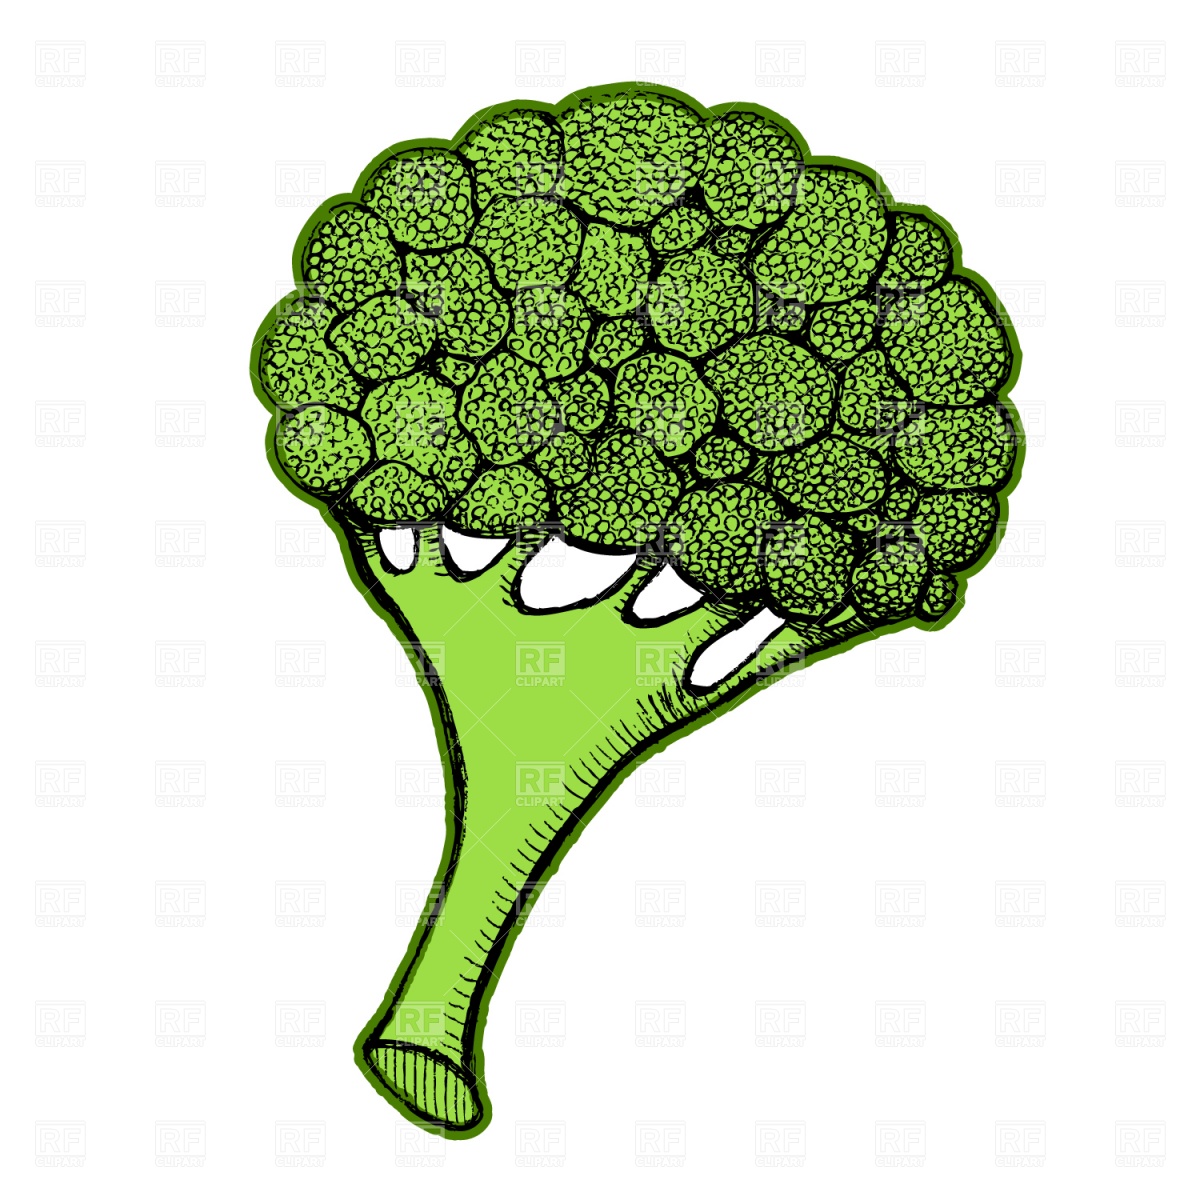 Broccoli Download Royalty Free Vector Clipart  Eps